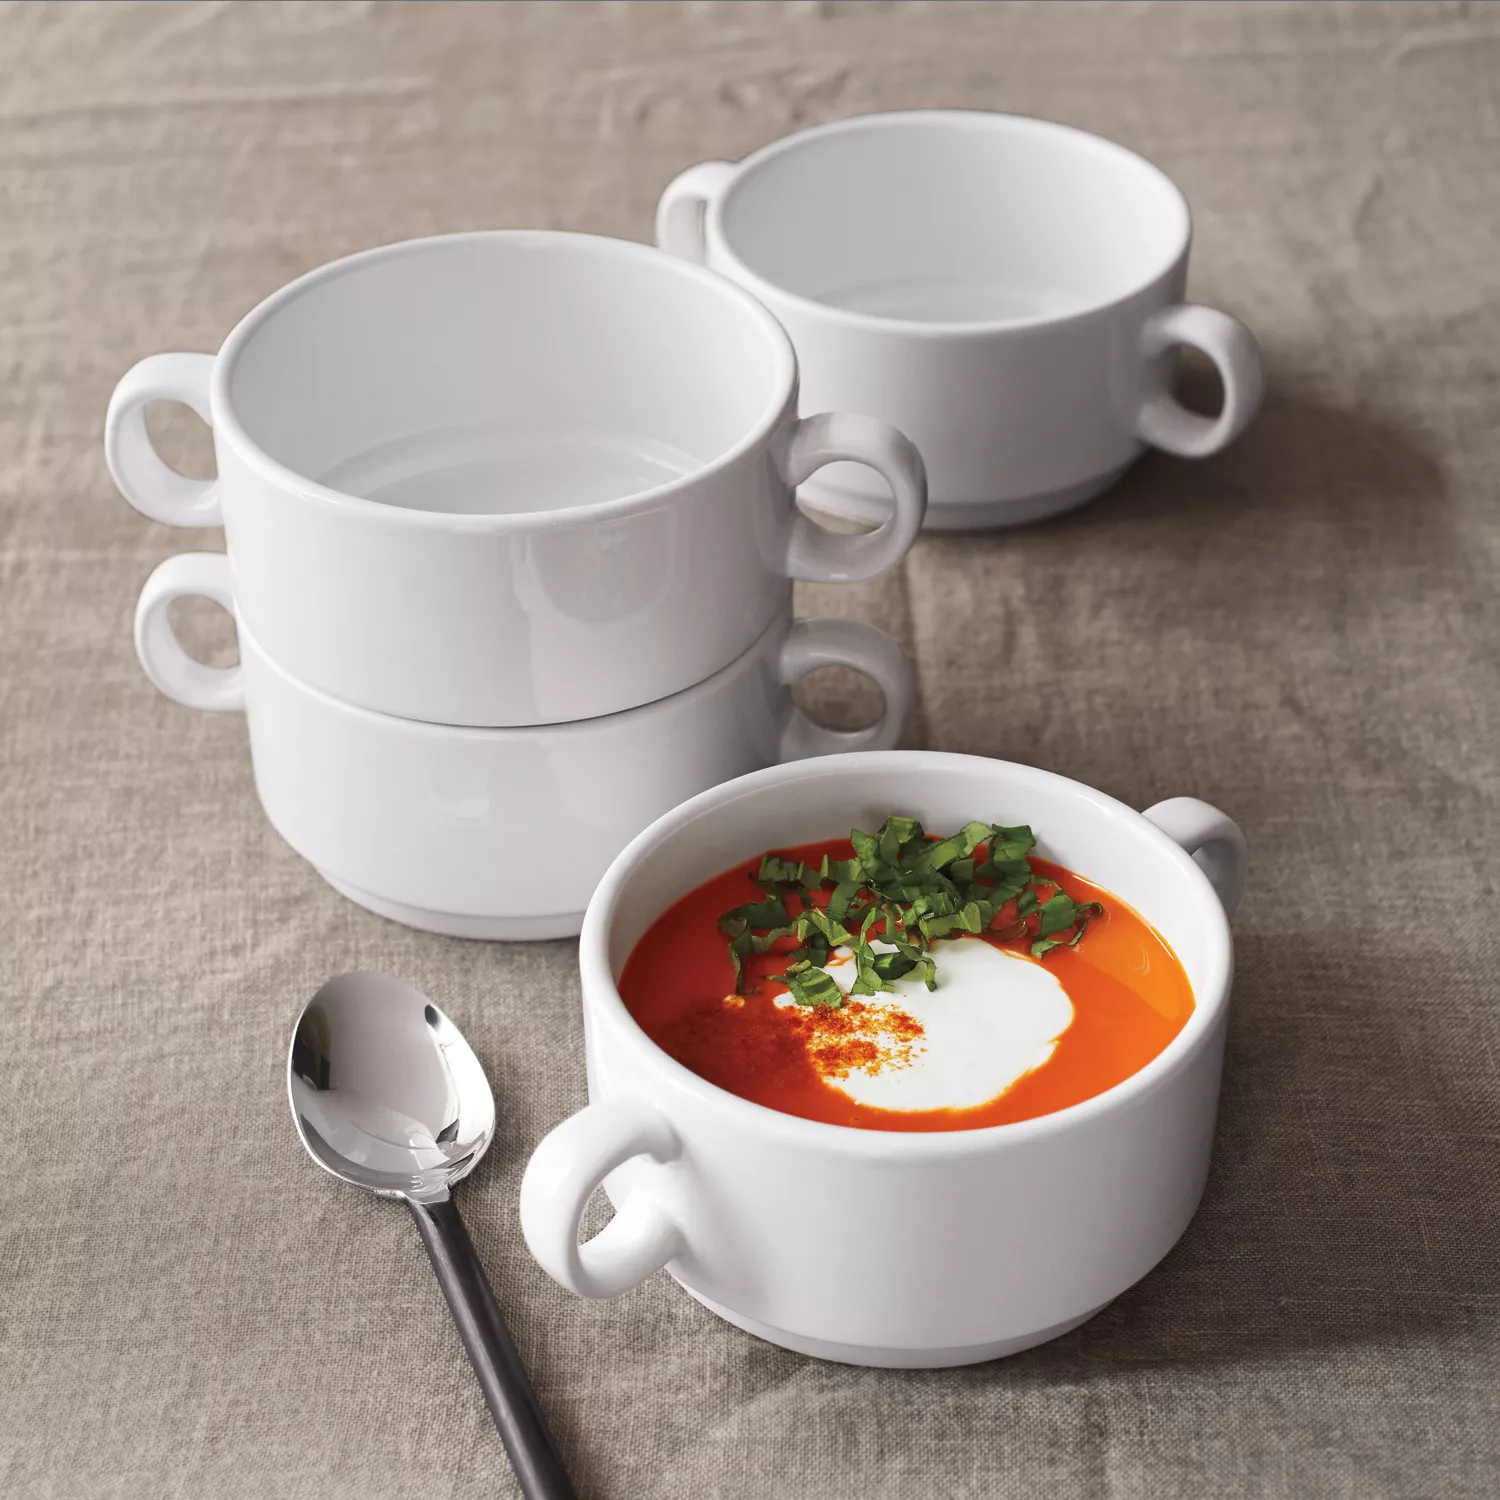 Williams Sonoma Pantry Soup Bowls with Handles, Set of 6